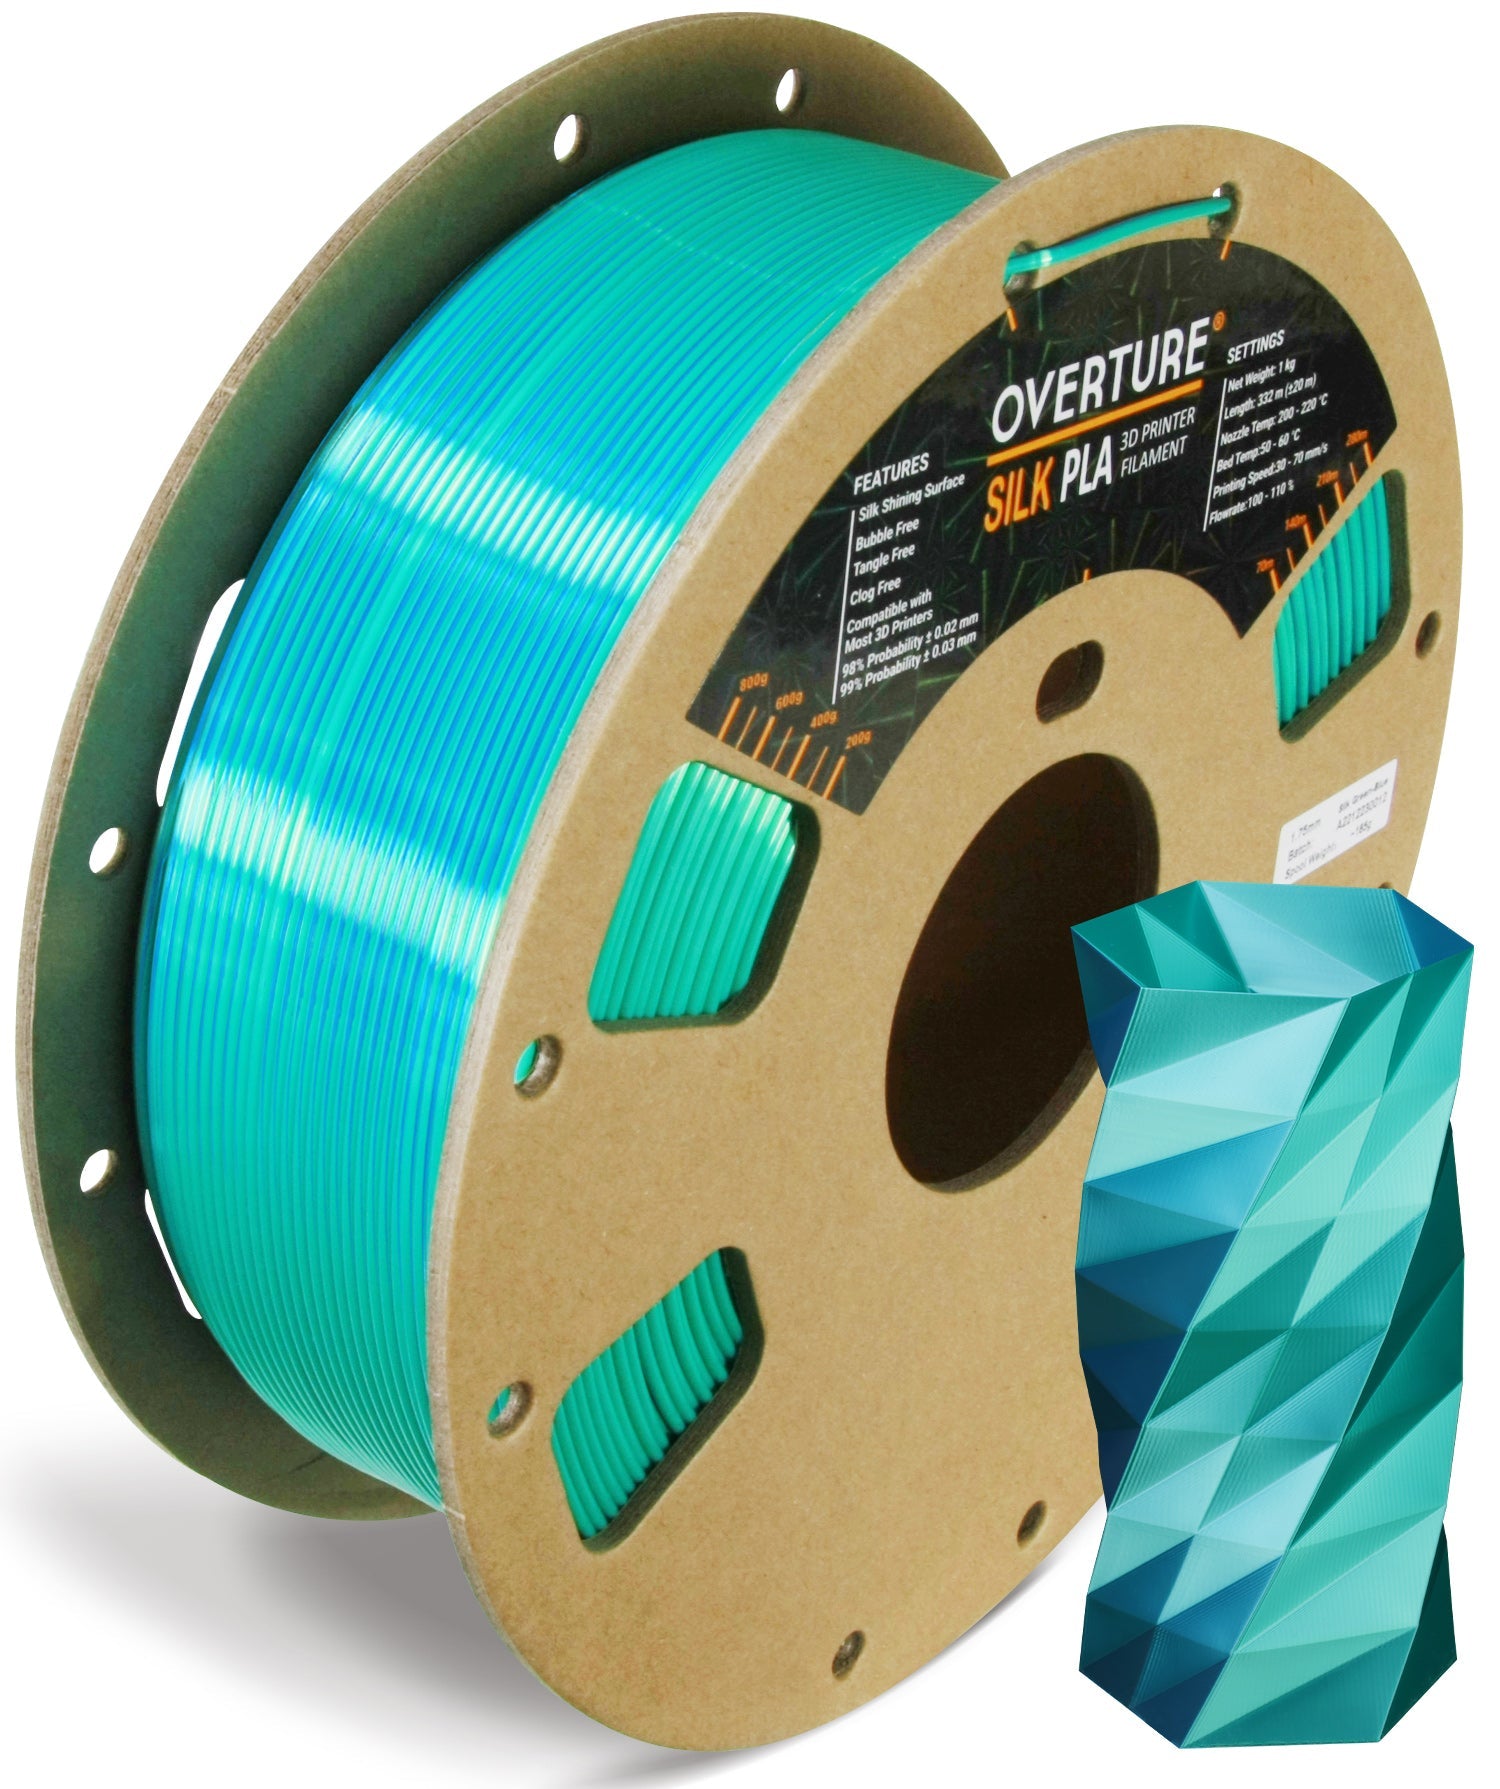 Cool things to 3D print - Silk PLA Tricolor Filament Green-blue